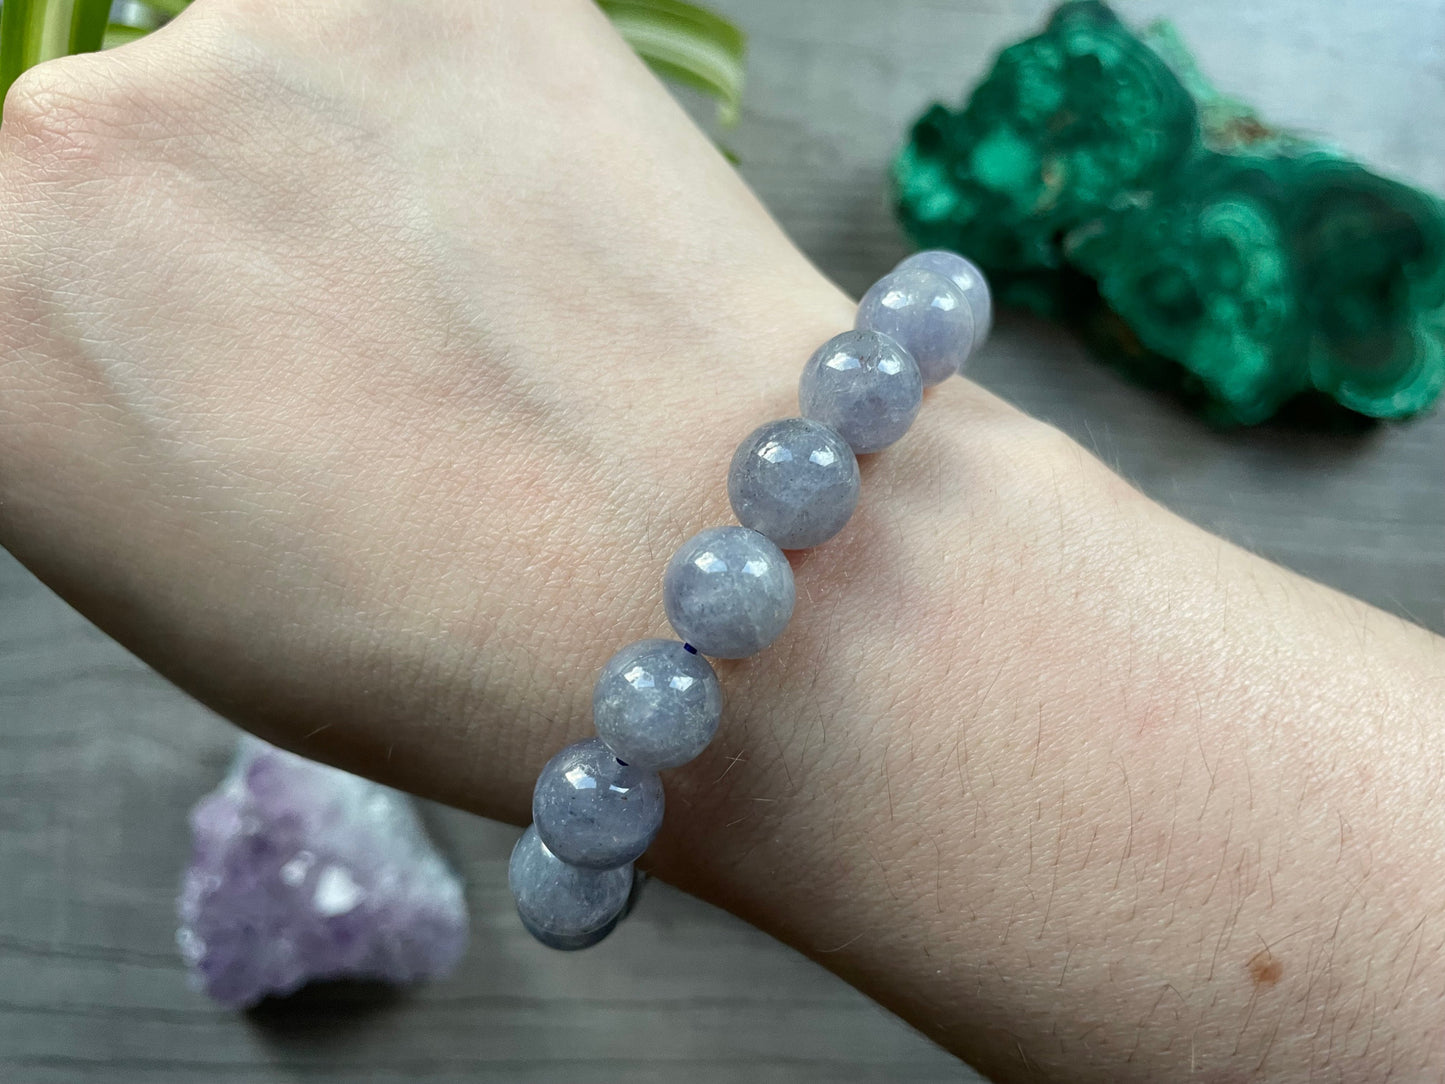 Pictured is a iolite bead bracelet.